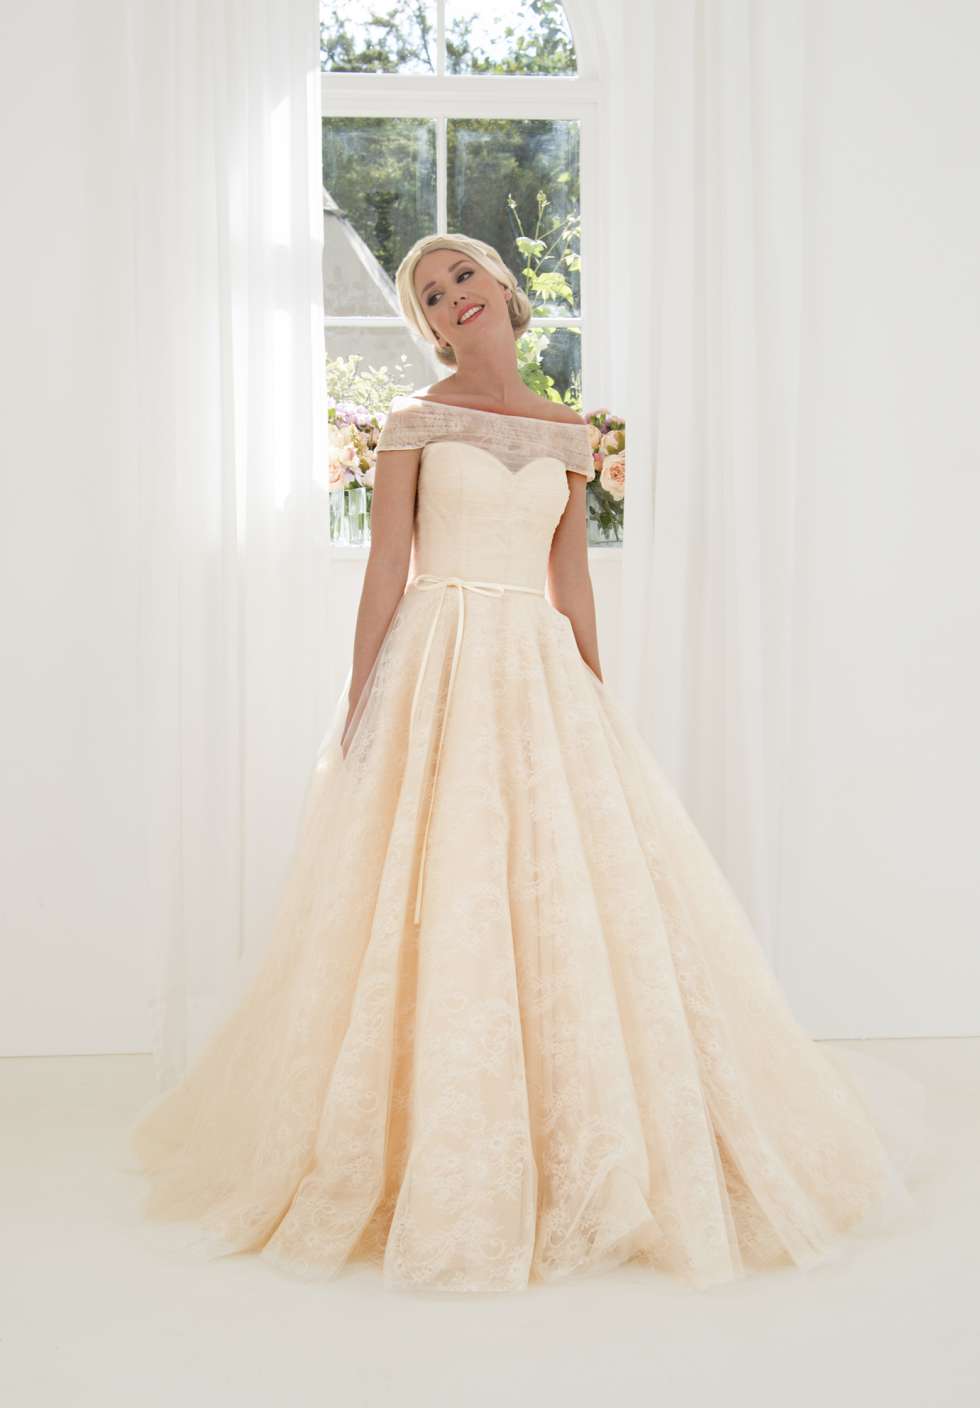 The 2019 Wedding Dress Collection by House of Mooshki